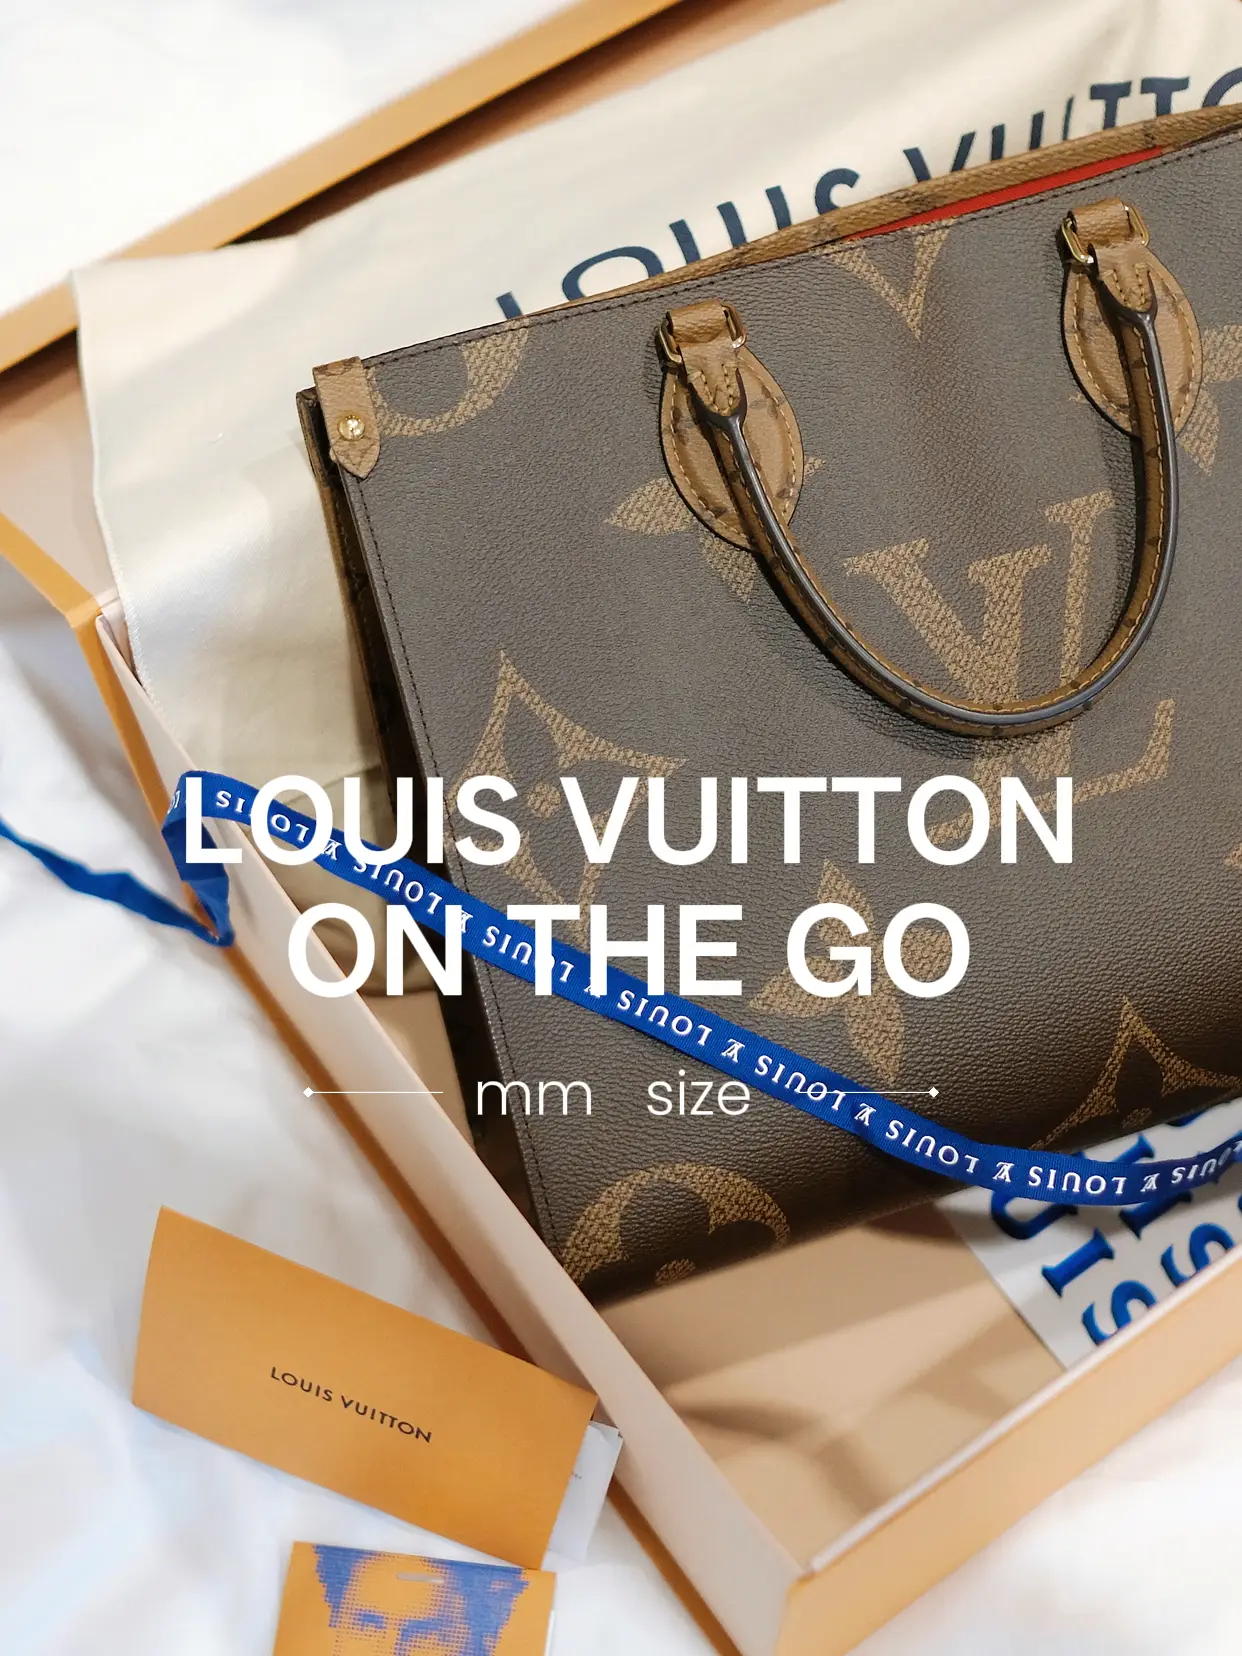 Do you know how to make use of paper bags? #bags #louisvuitton